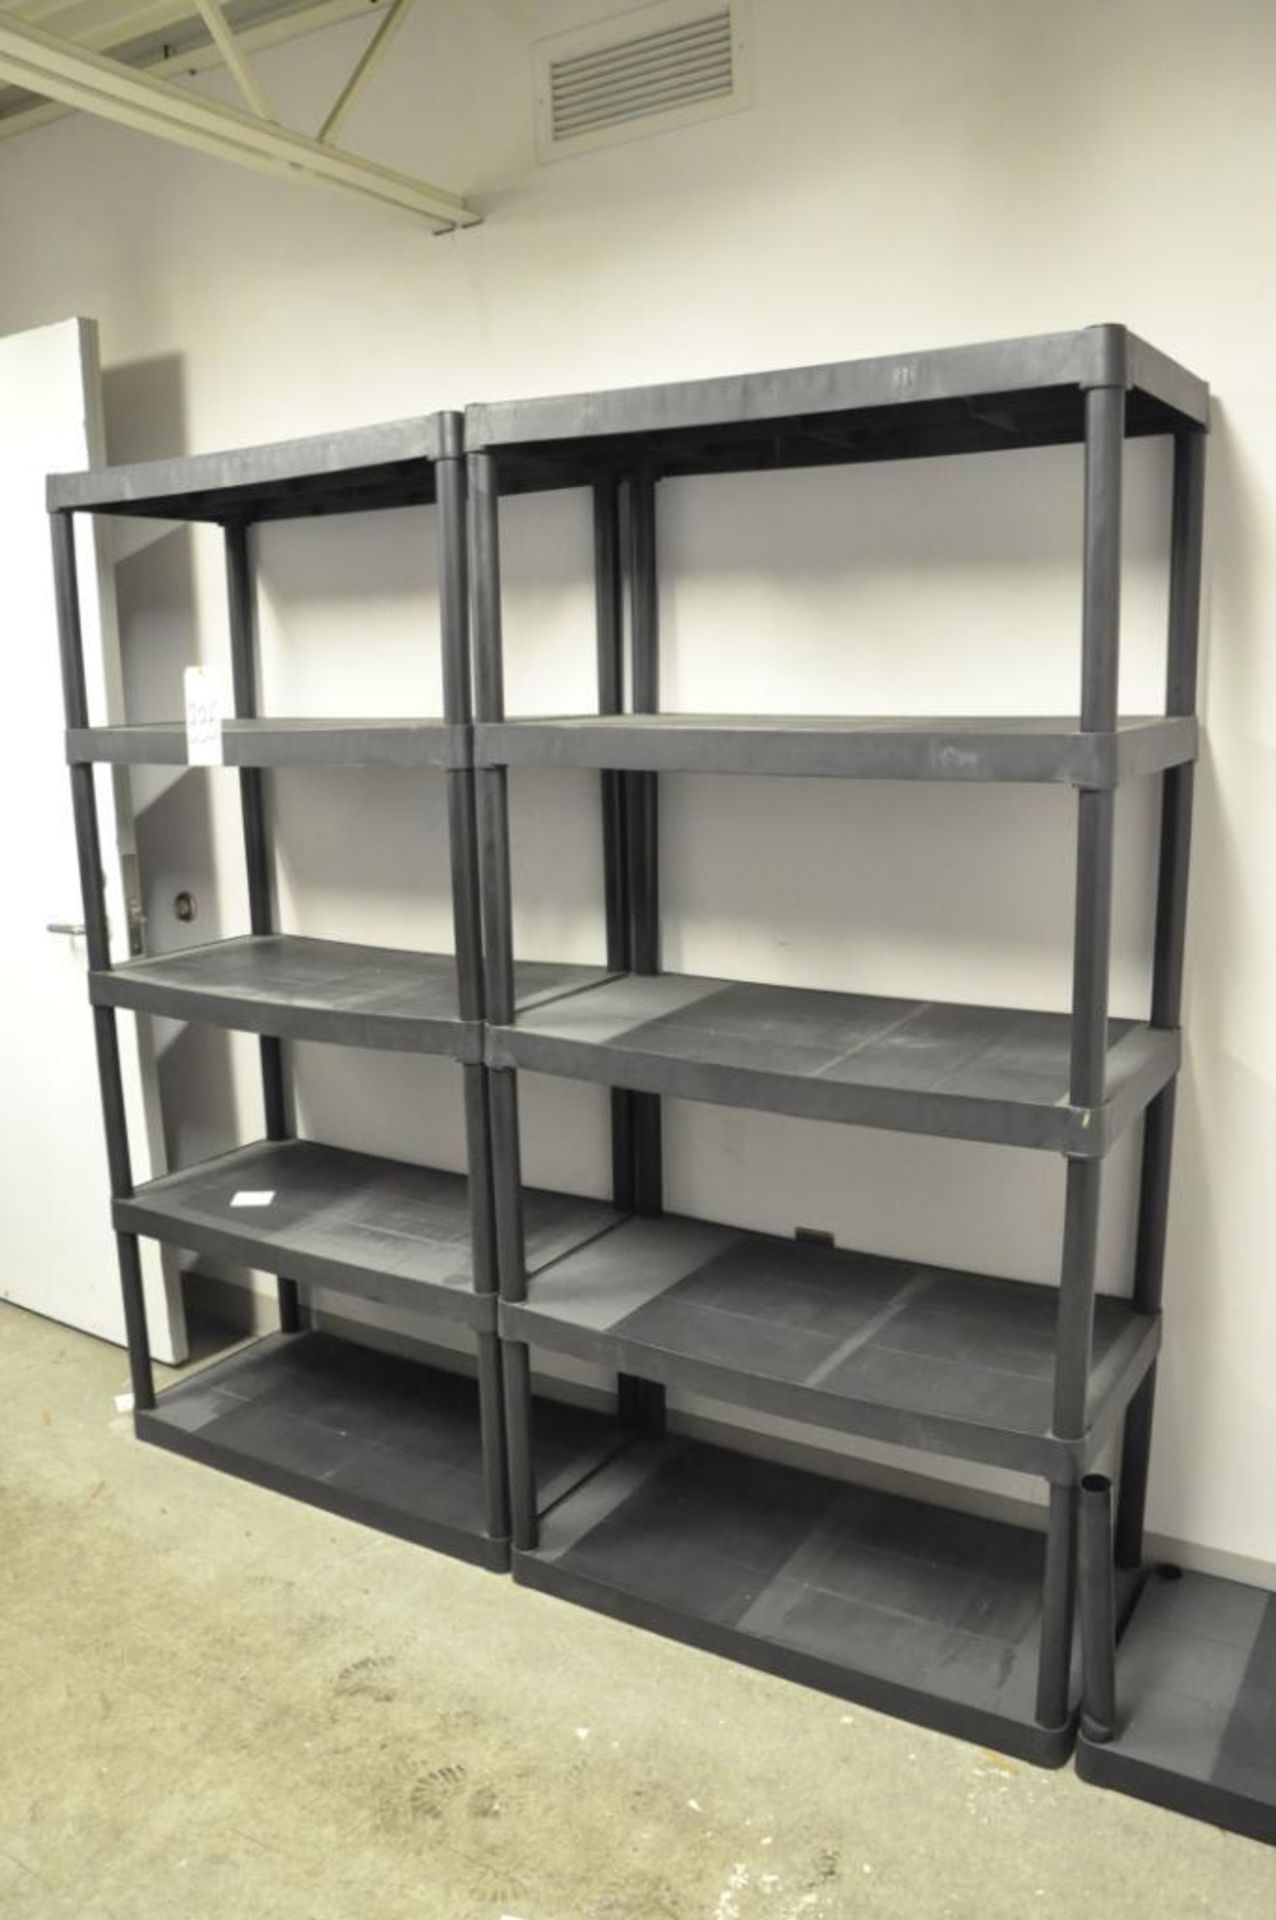 Lot-Plastic Shelving in (1) Room, (Upstairs Over Locker Room) - Image 2 of 3